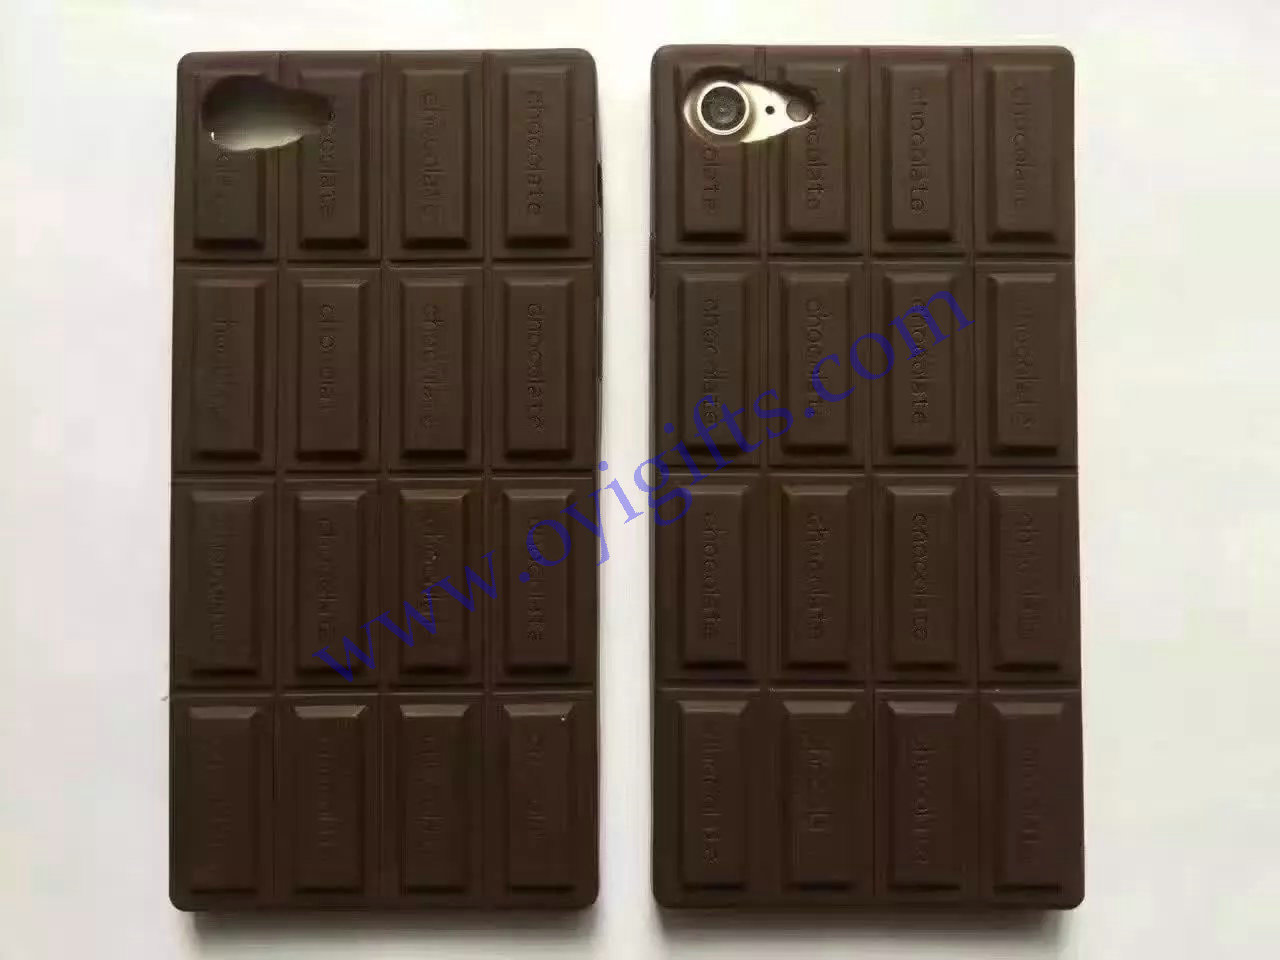 Love Chocolate Silicon phone covers case soft skin